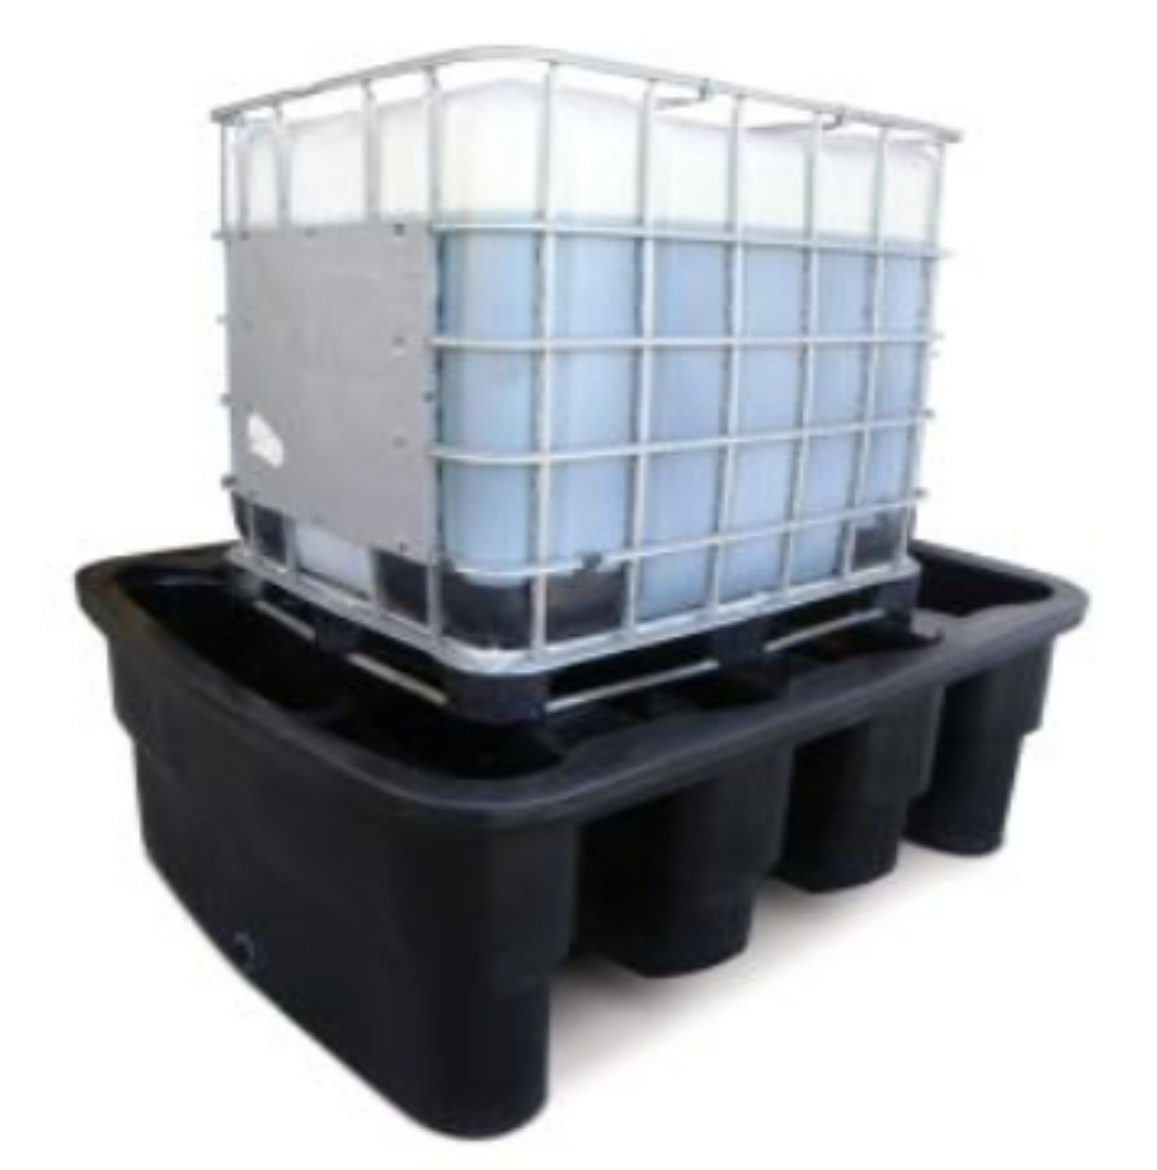 Picture of SINGLE BUND FOR IBC 1150L SUMP, 2 POLYPROPELENE GRATES